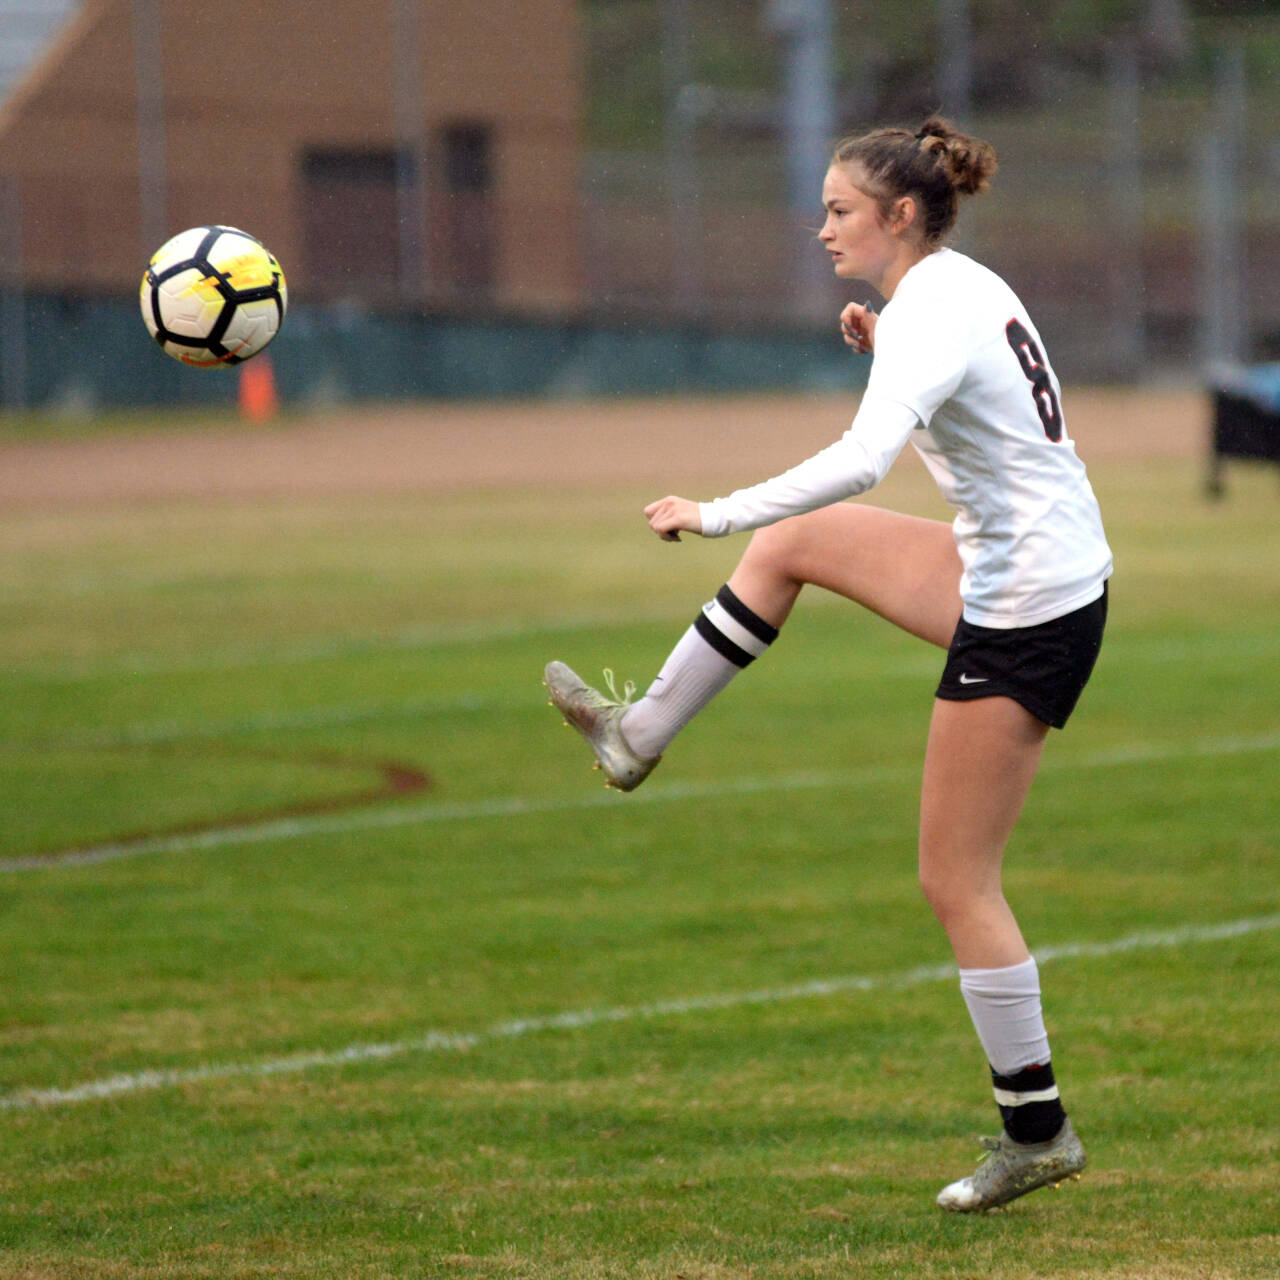 DAILY WORLD FILE PHOTO Ocosta midfielder Kylee Denney, seen here in a file photo from Sept. 28, was named to the 2B Central-Pacific All-League Second Team after scoring eight goals with 11 assists for the 2023 season.